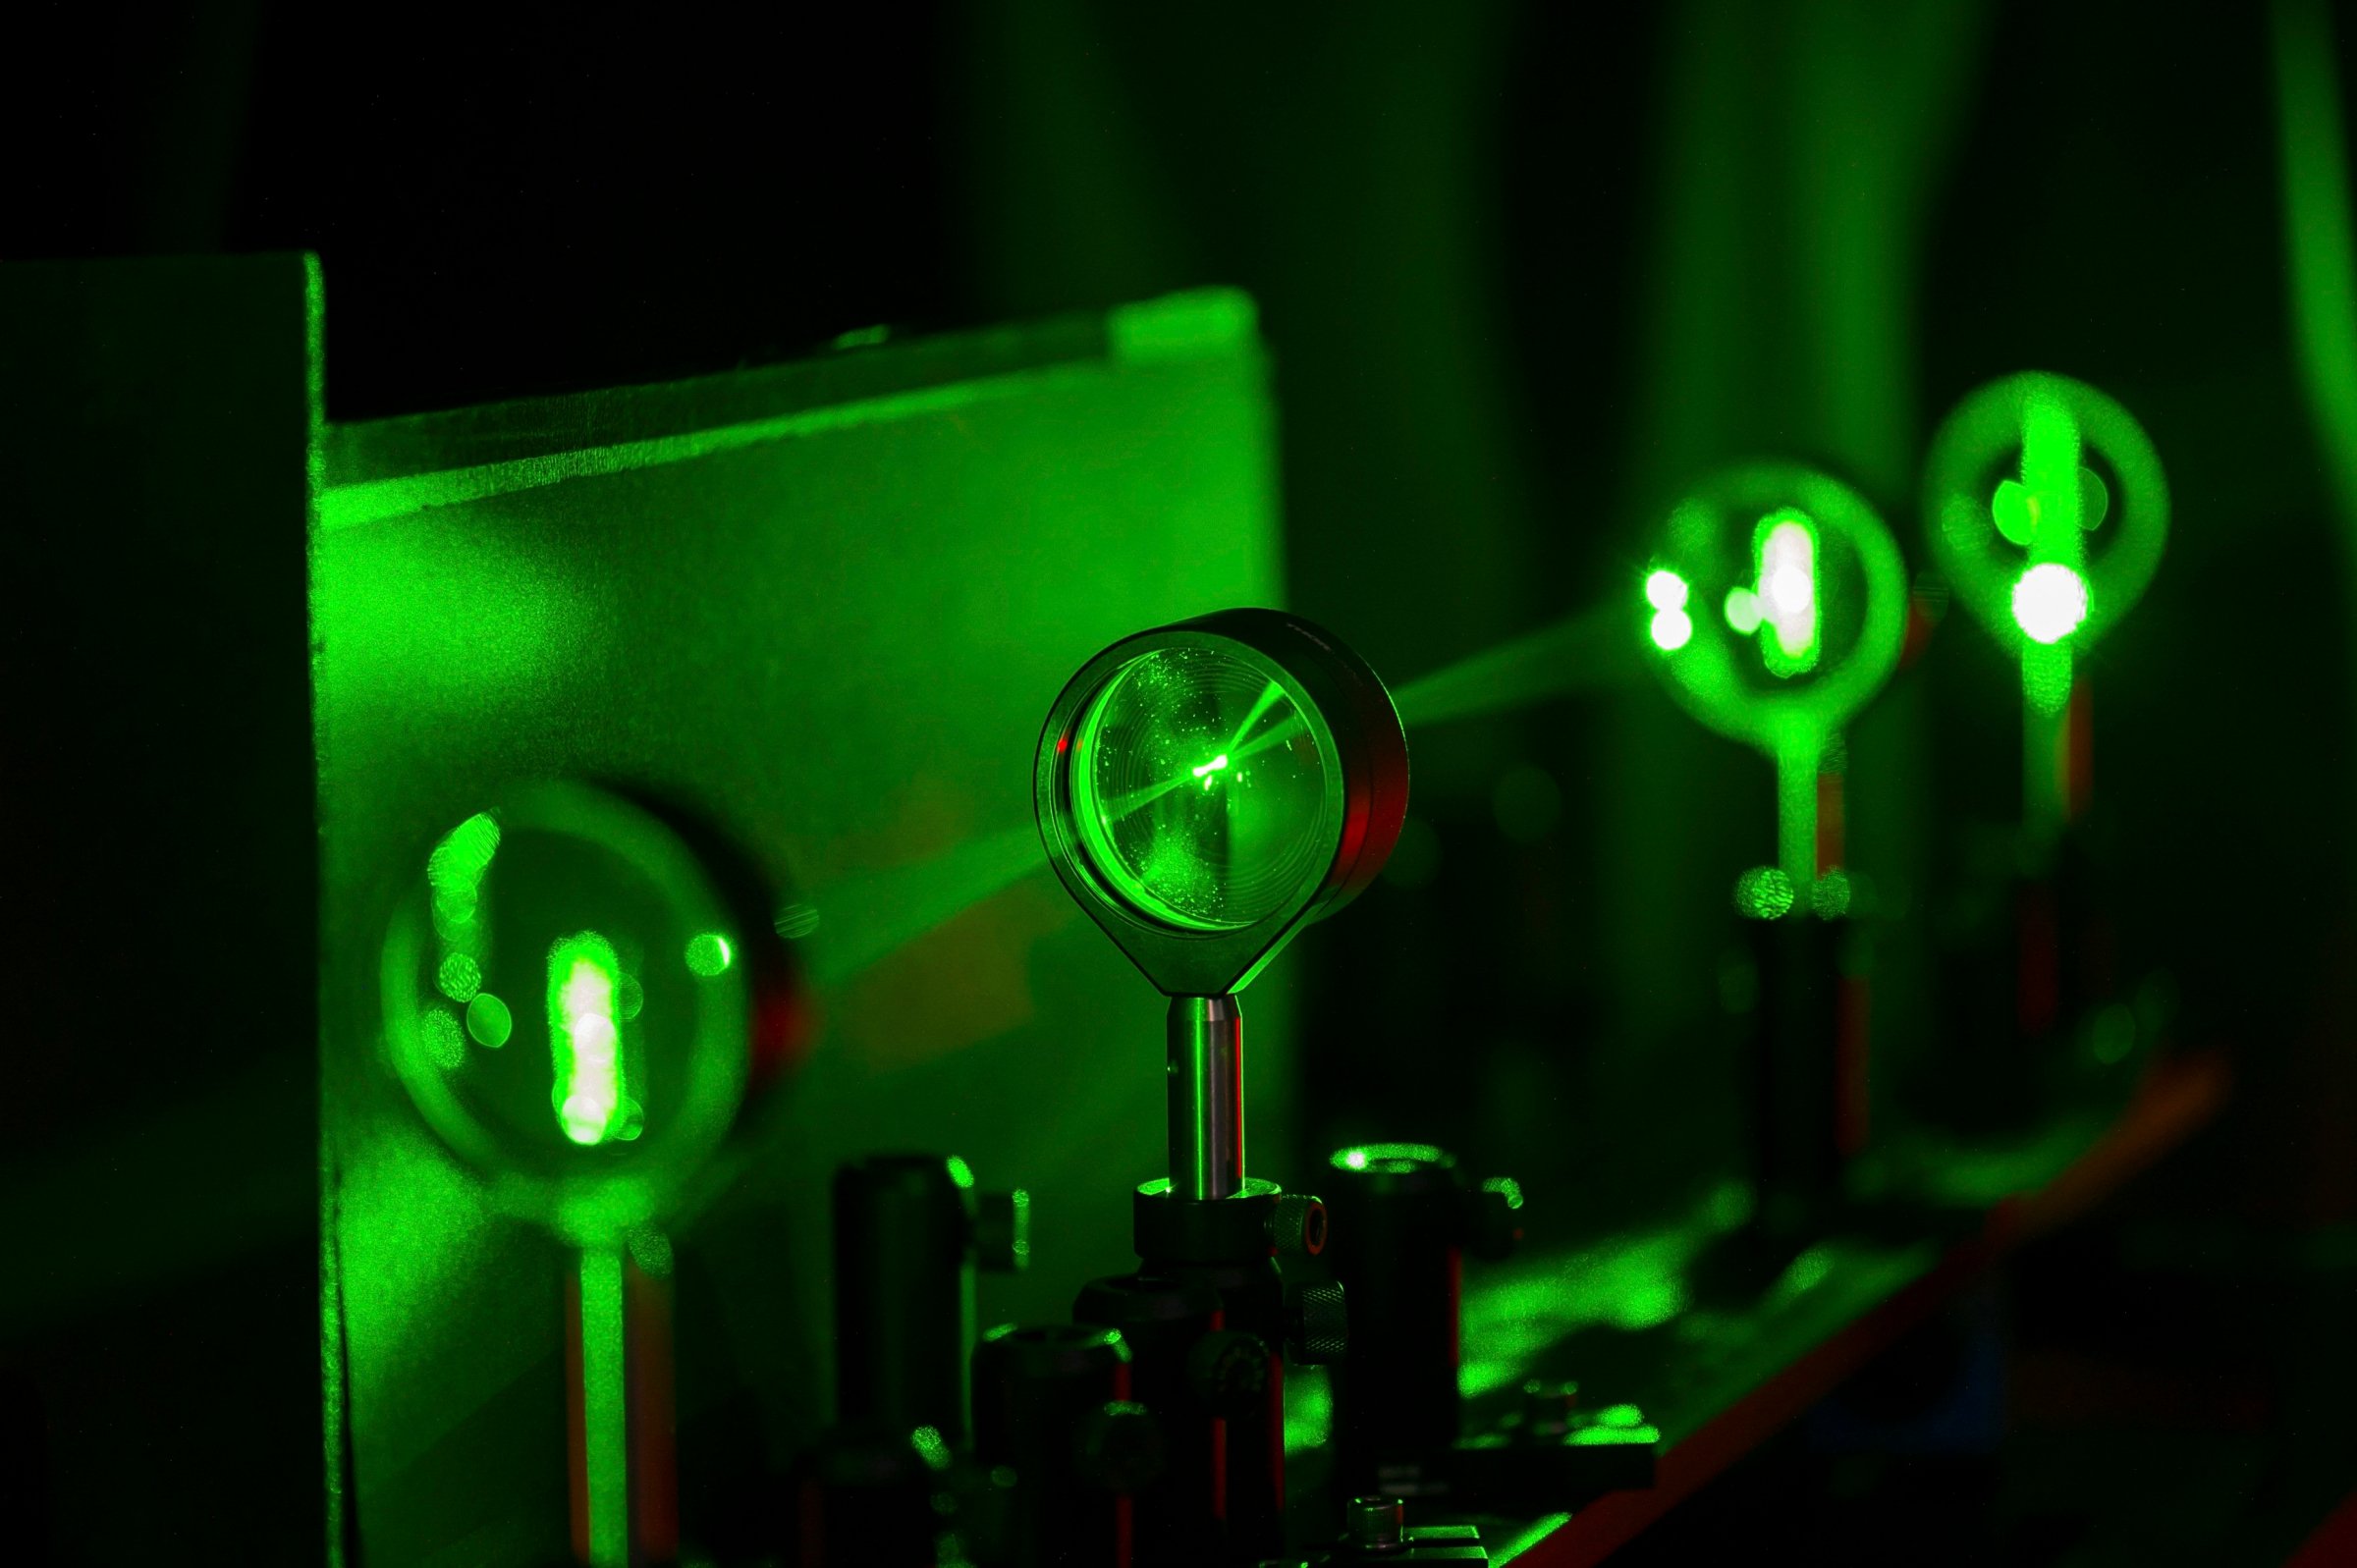 Handout photo of cloaking device using four lenses developed by University of Rochester physics professor Howell and graduate student Choi is demonstrated in Rochester